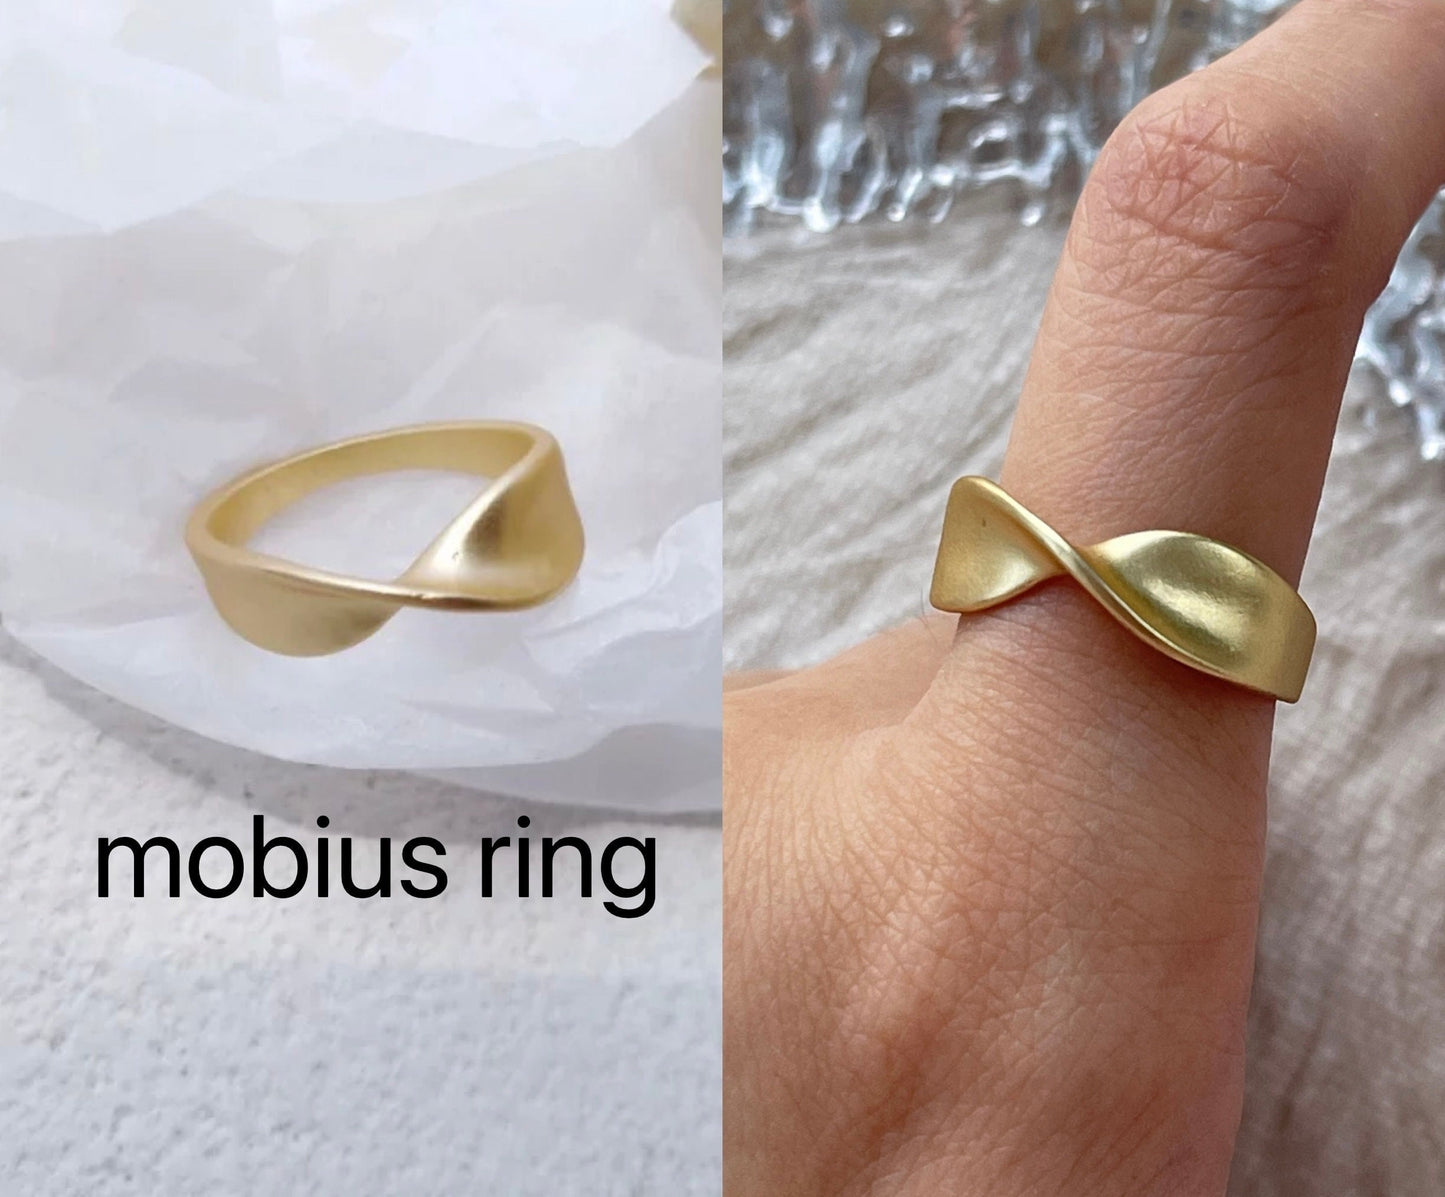 Thick Mobius ring, Infinity loop ring, Engagement promise ring, Dainty infinity ring, Gold mobius ring, Chunky rings, Wide band ring, y2k